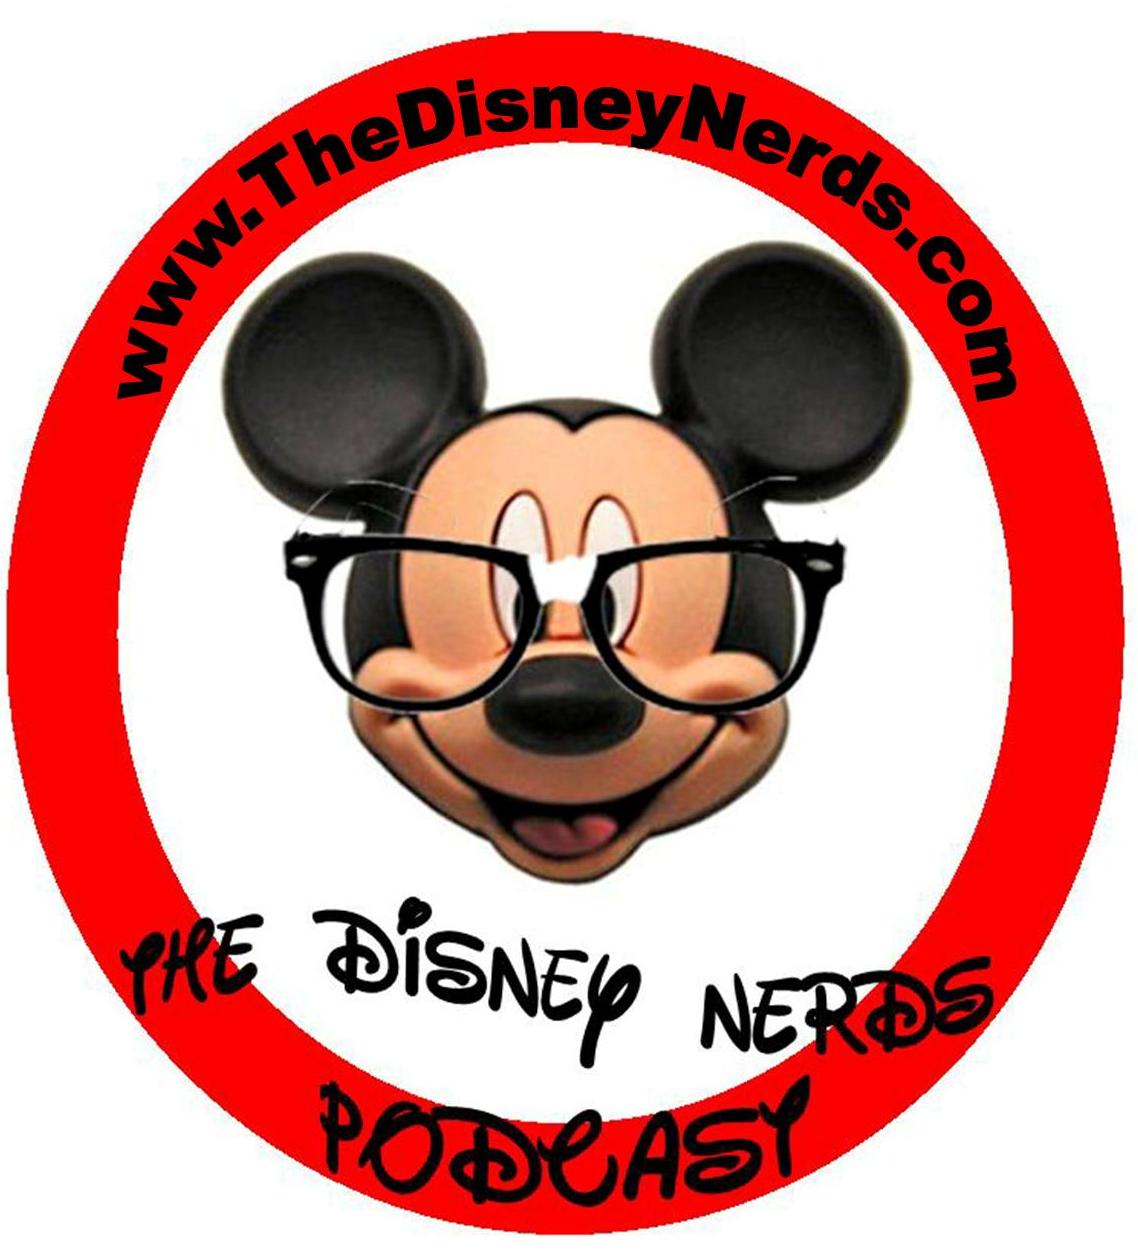 Show # 34 of the Disney Nerds Podcast